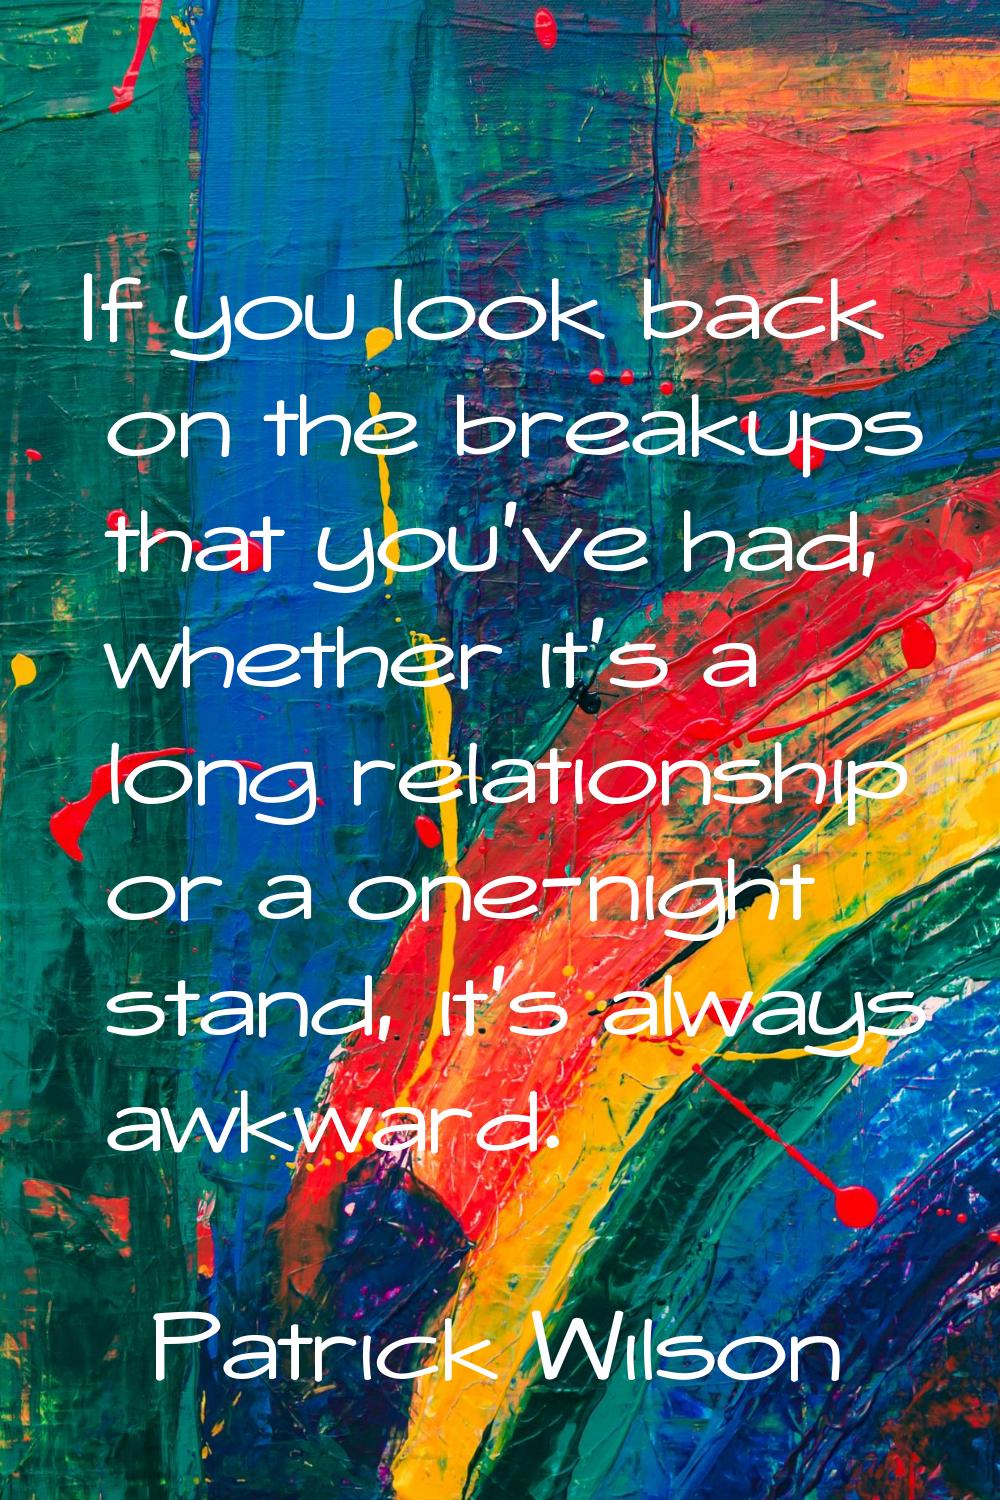 If you look back on the breakups that you've had, whether it's a long relationship or a one-night s